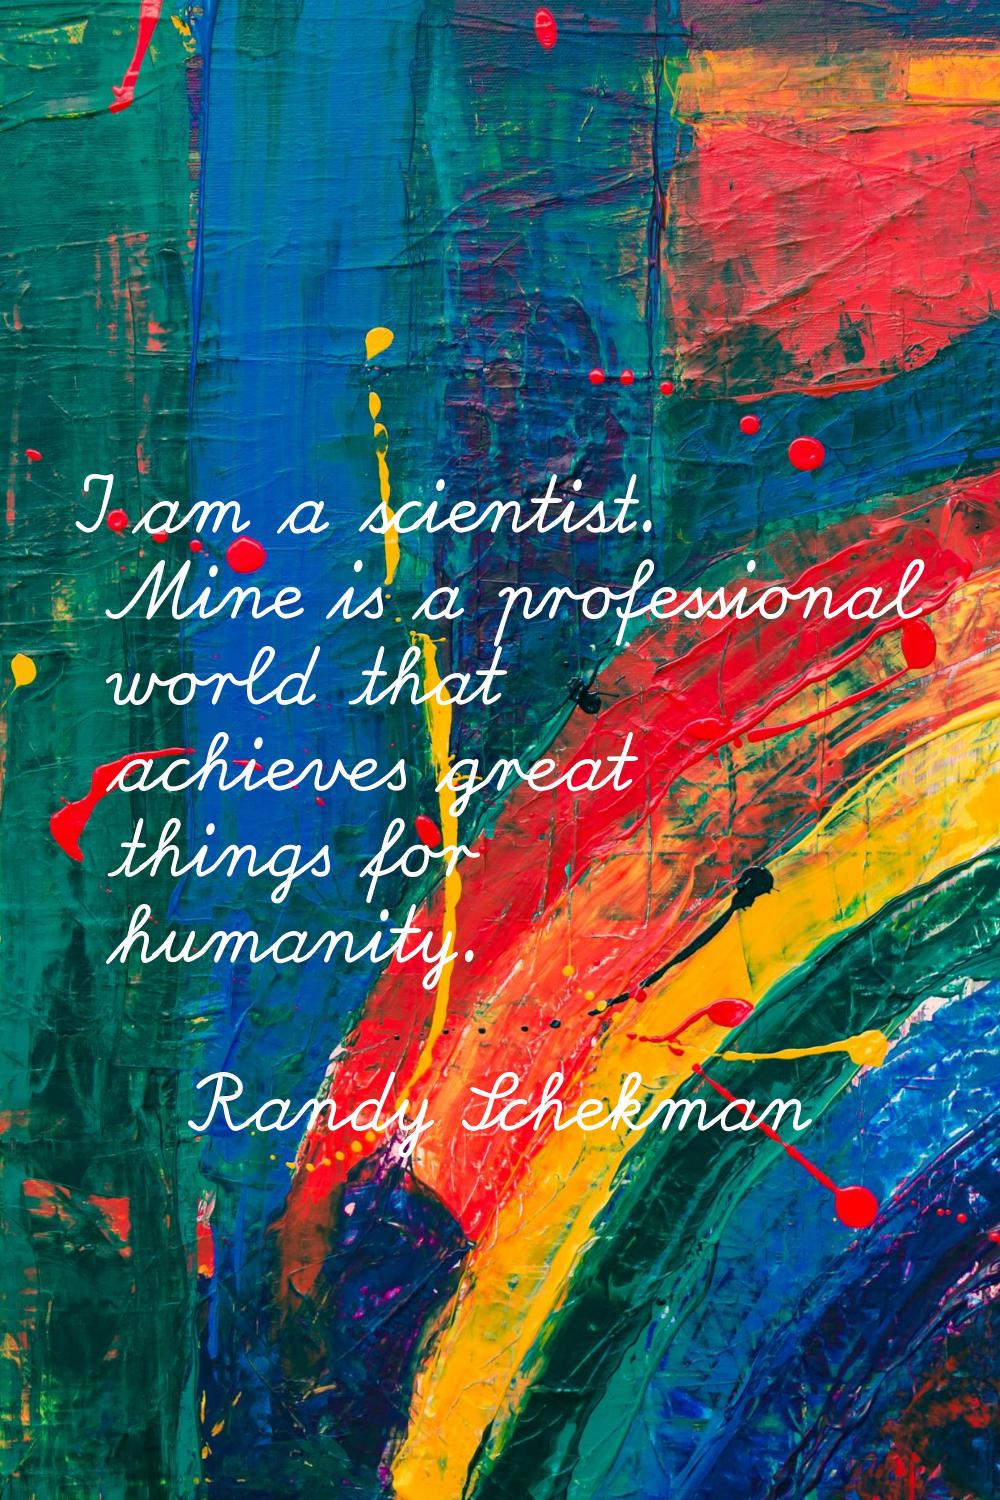 I am a scientist. Mine is a professional world that achieves great things for humanity.